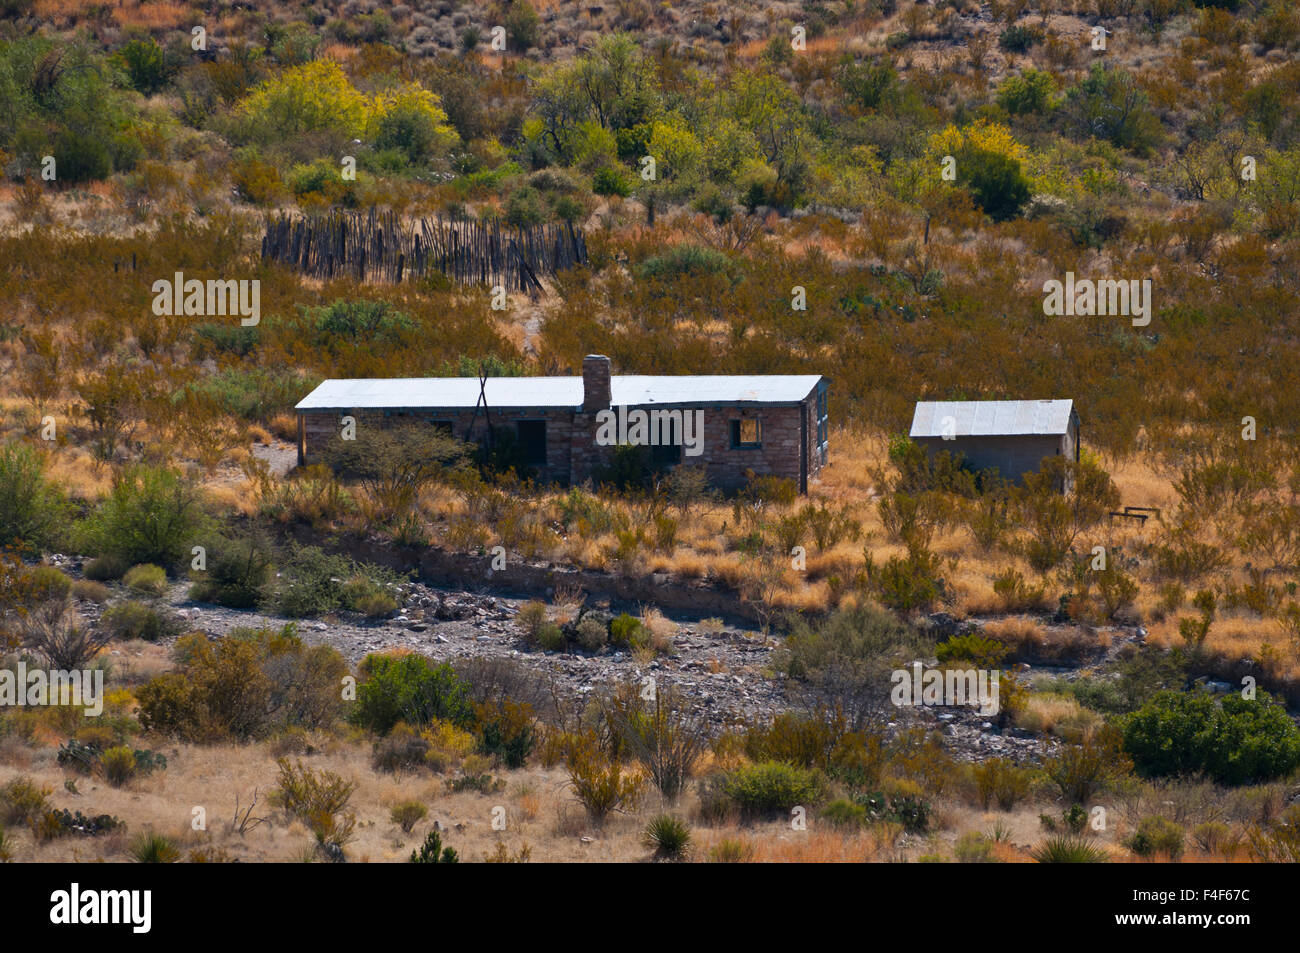 USA, Texas, Big Bend National Park, Homer Wilson Ranch and old Corral from Ross Maxwell Scenic Drive. Stock Photo